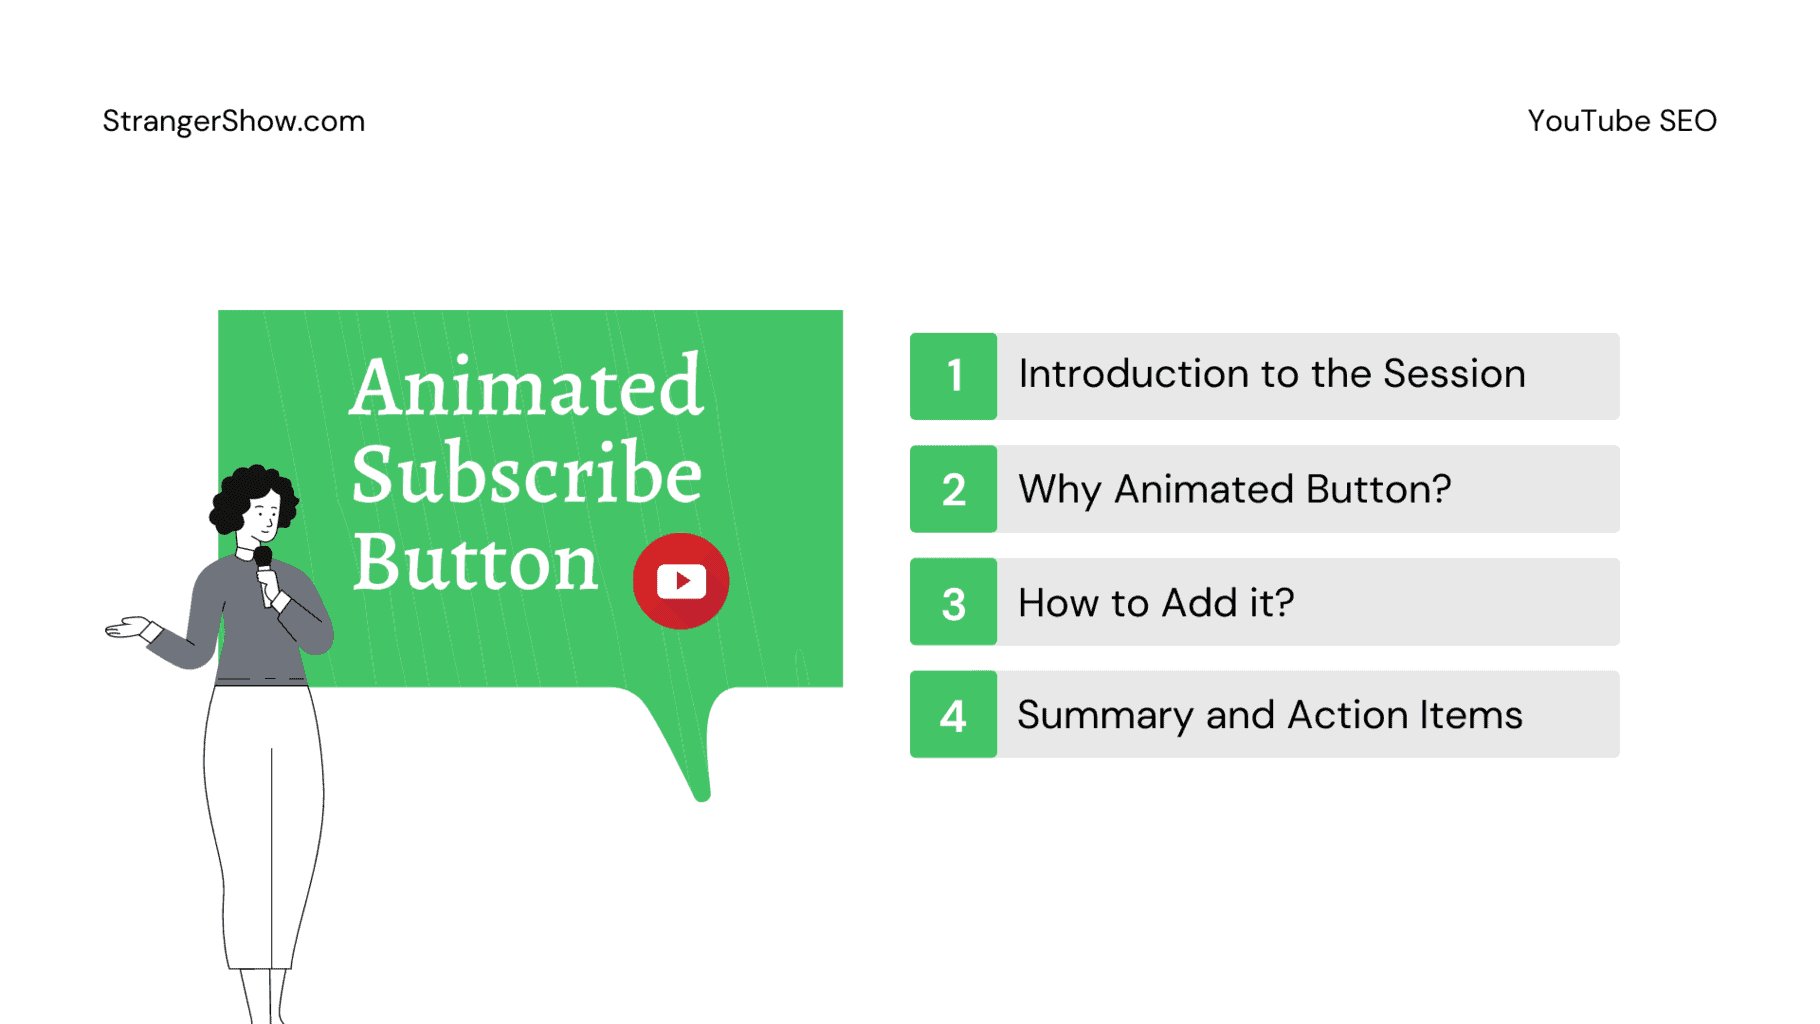 Animated Subscribe Button: How to Add it on YouTube Video